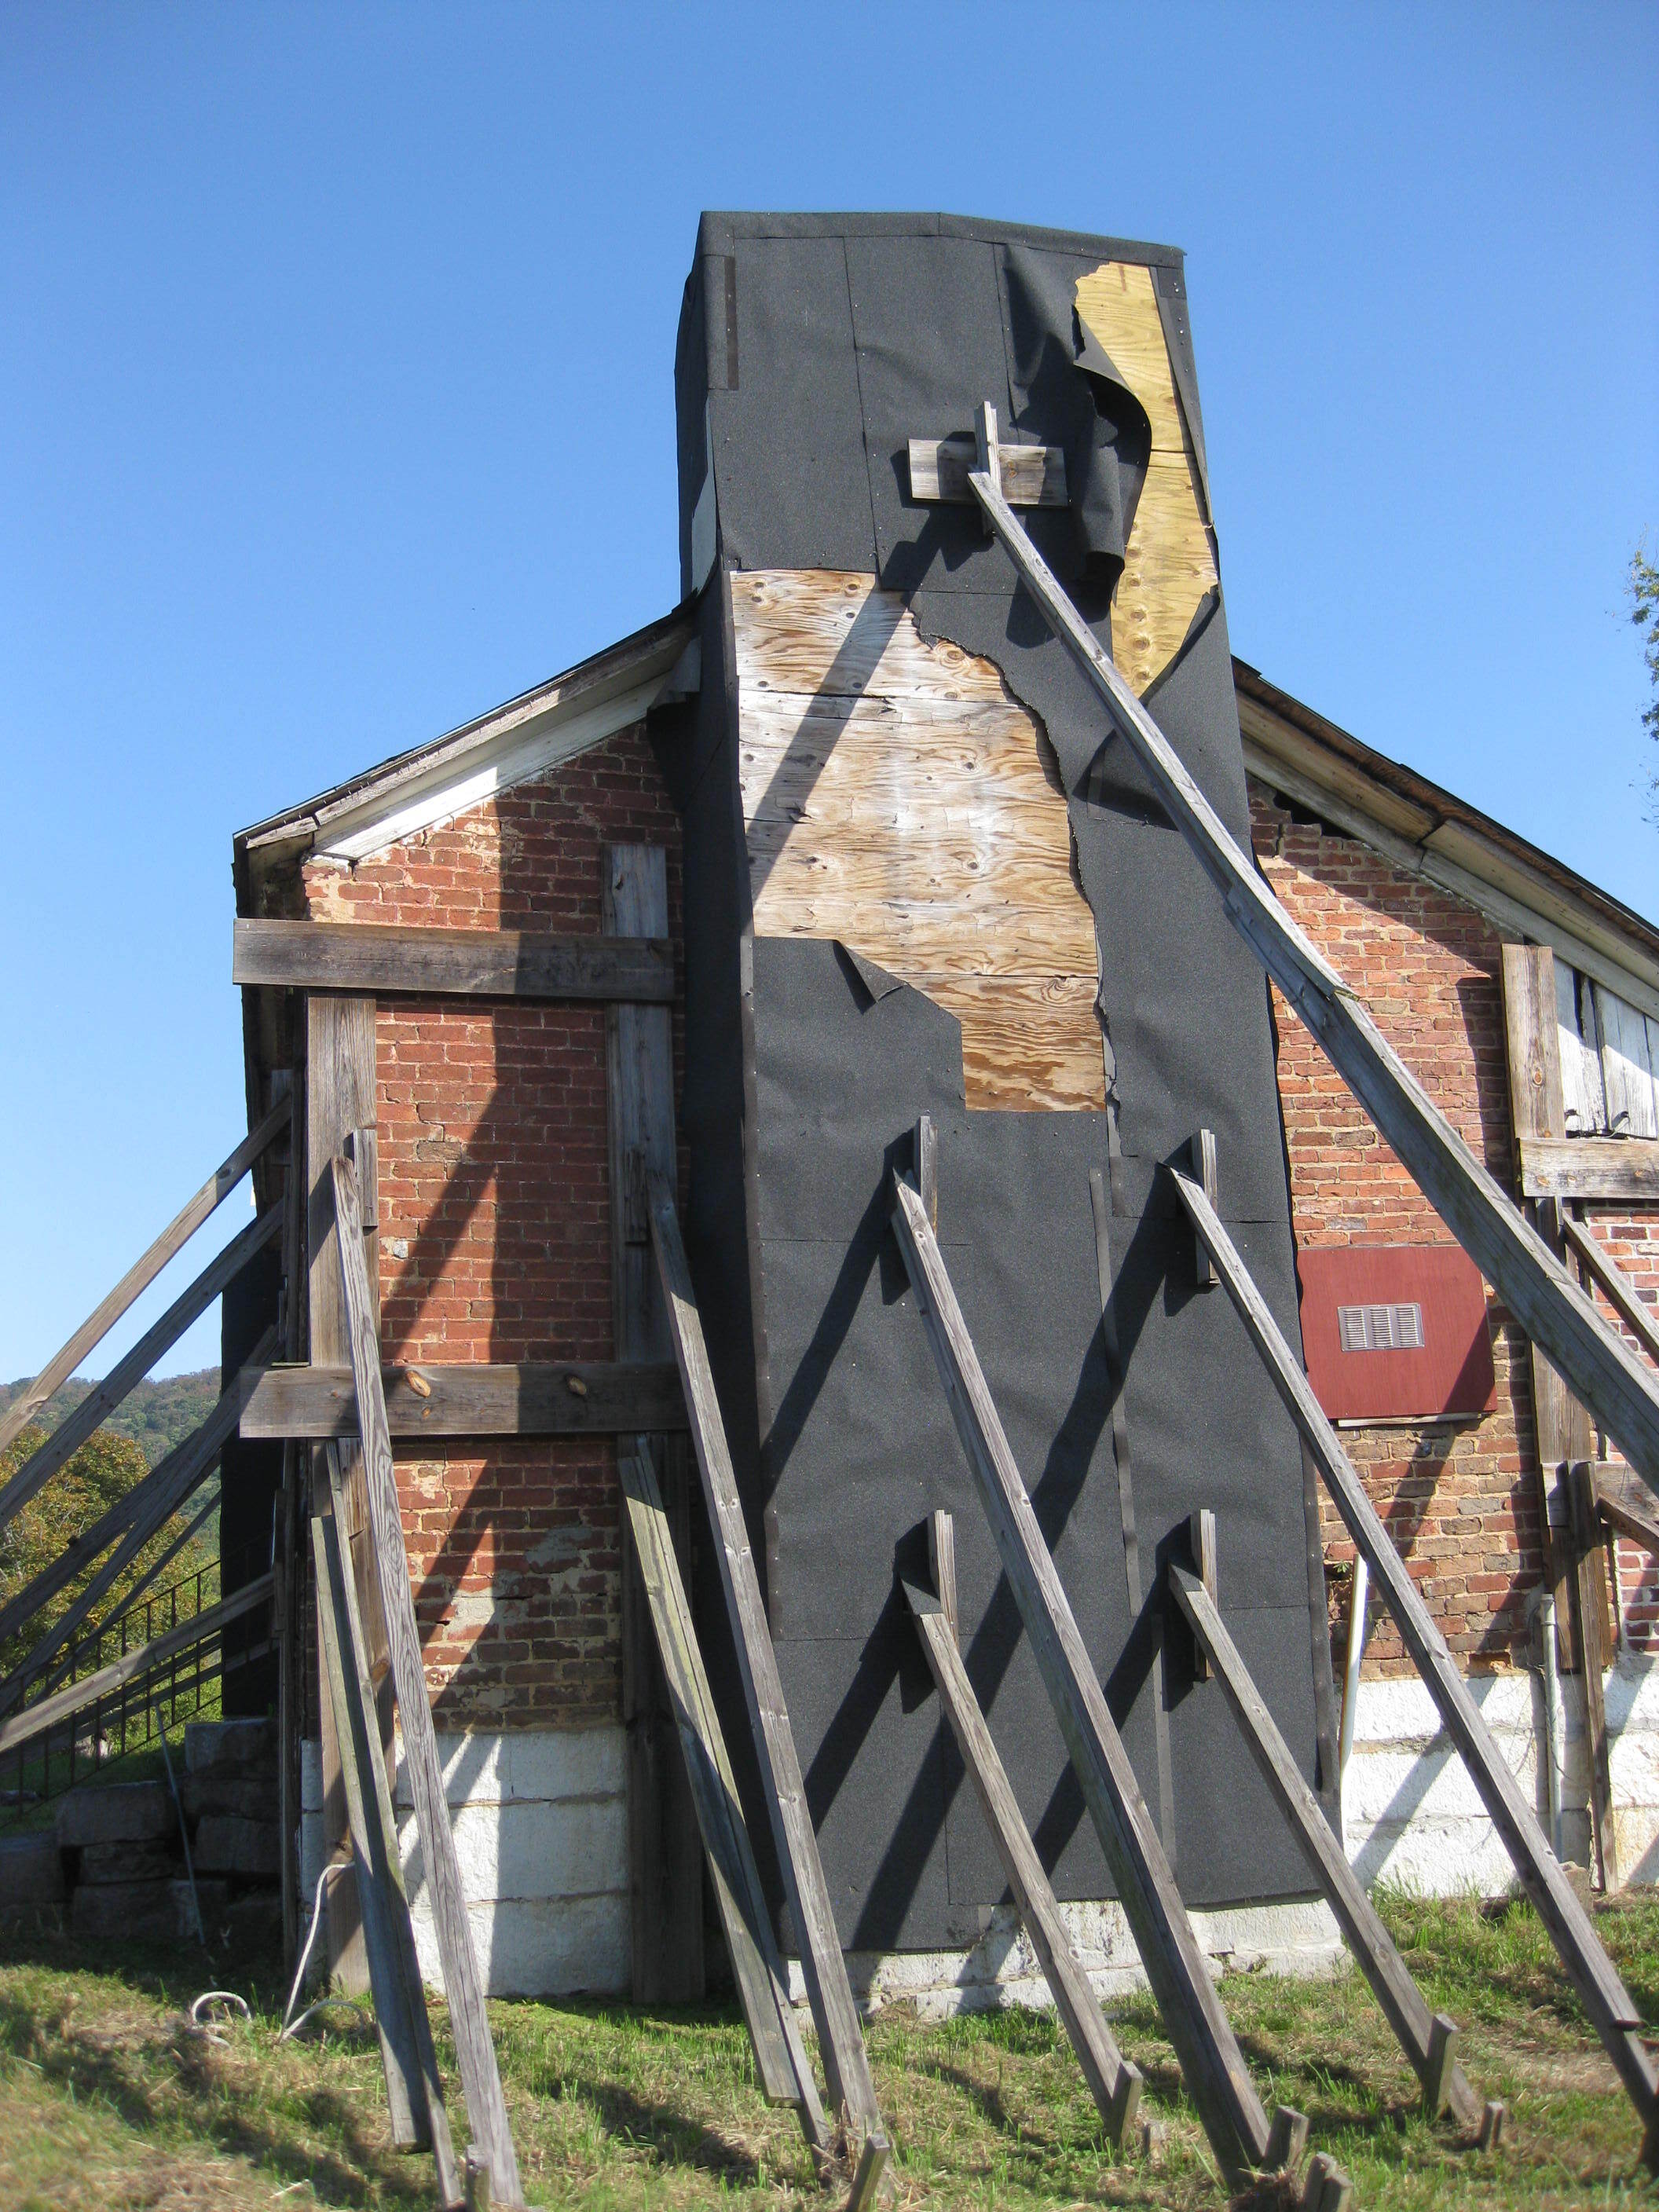 A chimney reconstruction at the James Brown House in Ooltewah, Tennessee